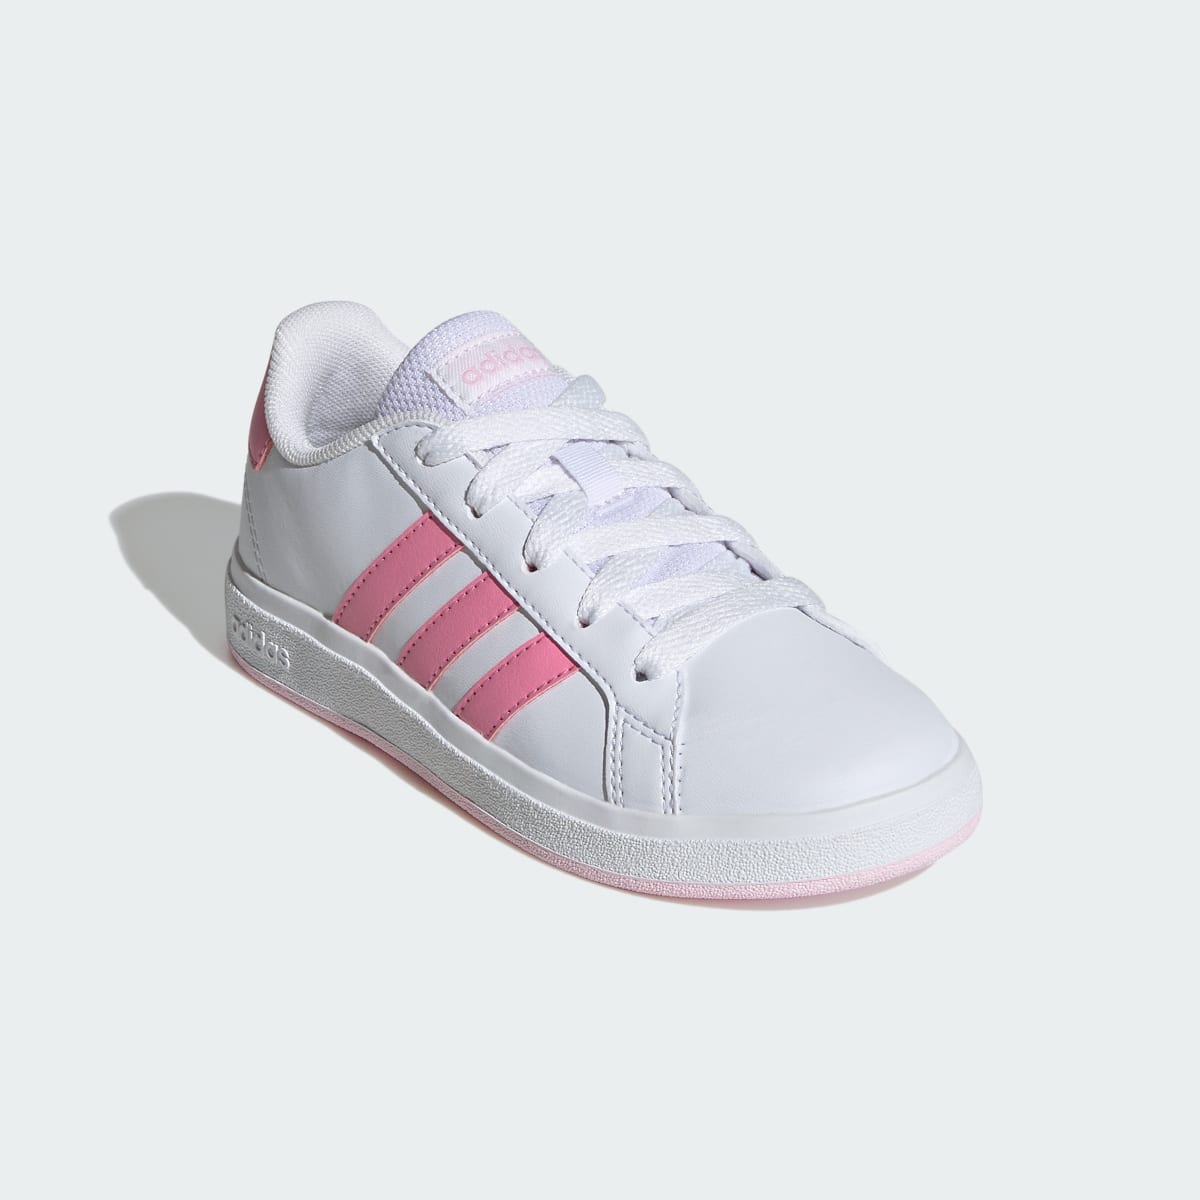 Adidas Chaussure Grand Court Lifestyle Tennis Lace-Up. 5